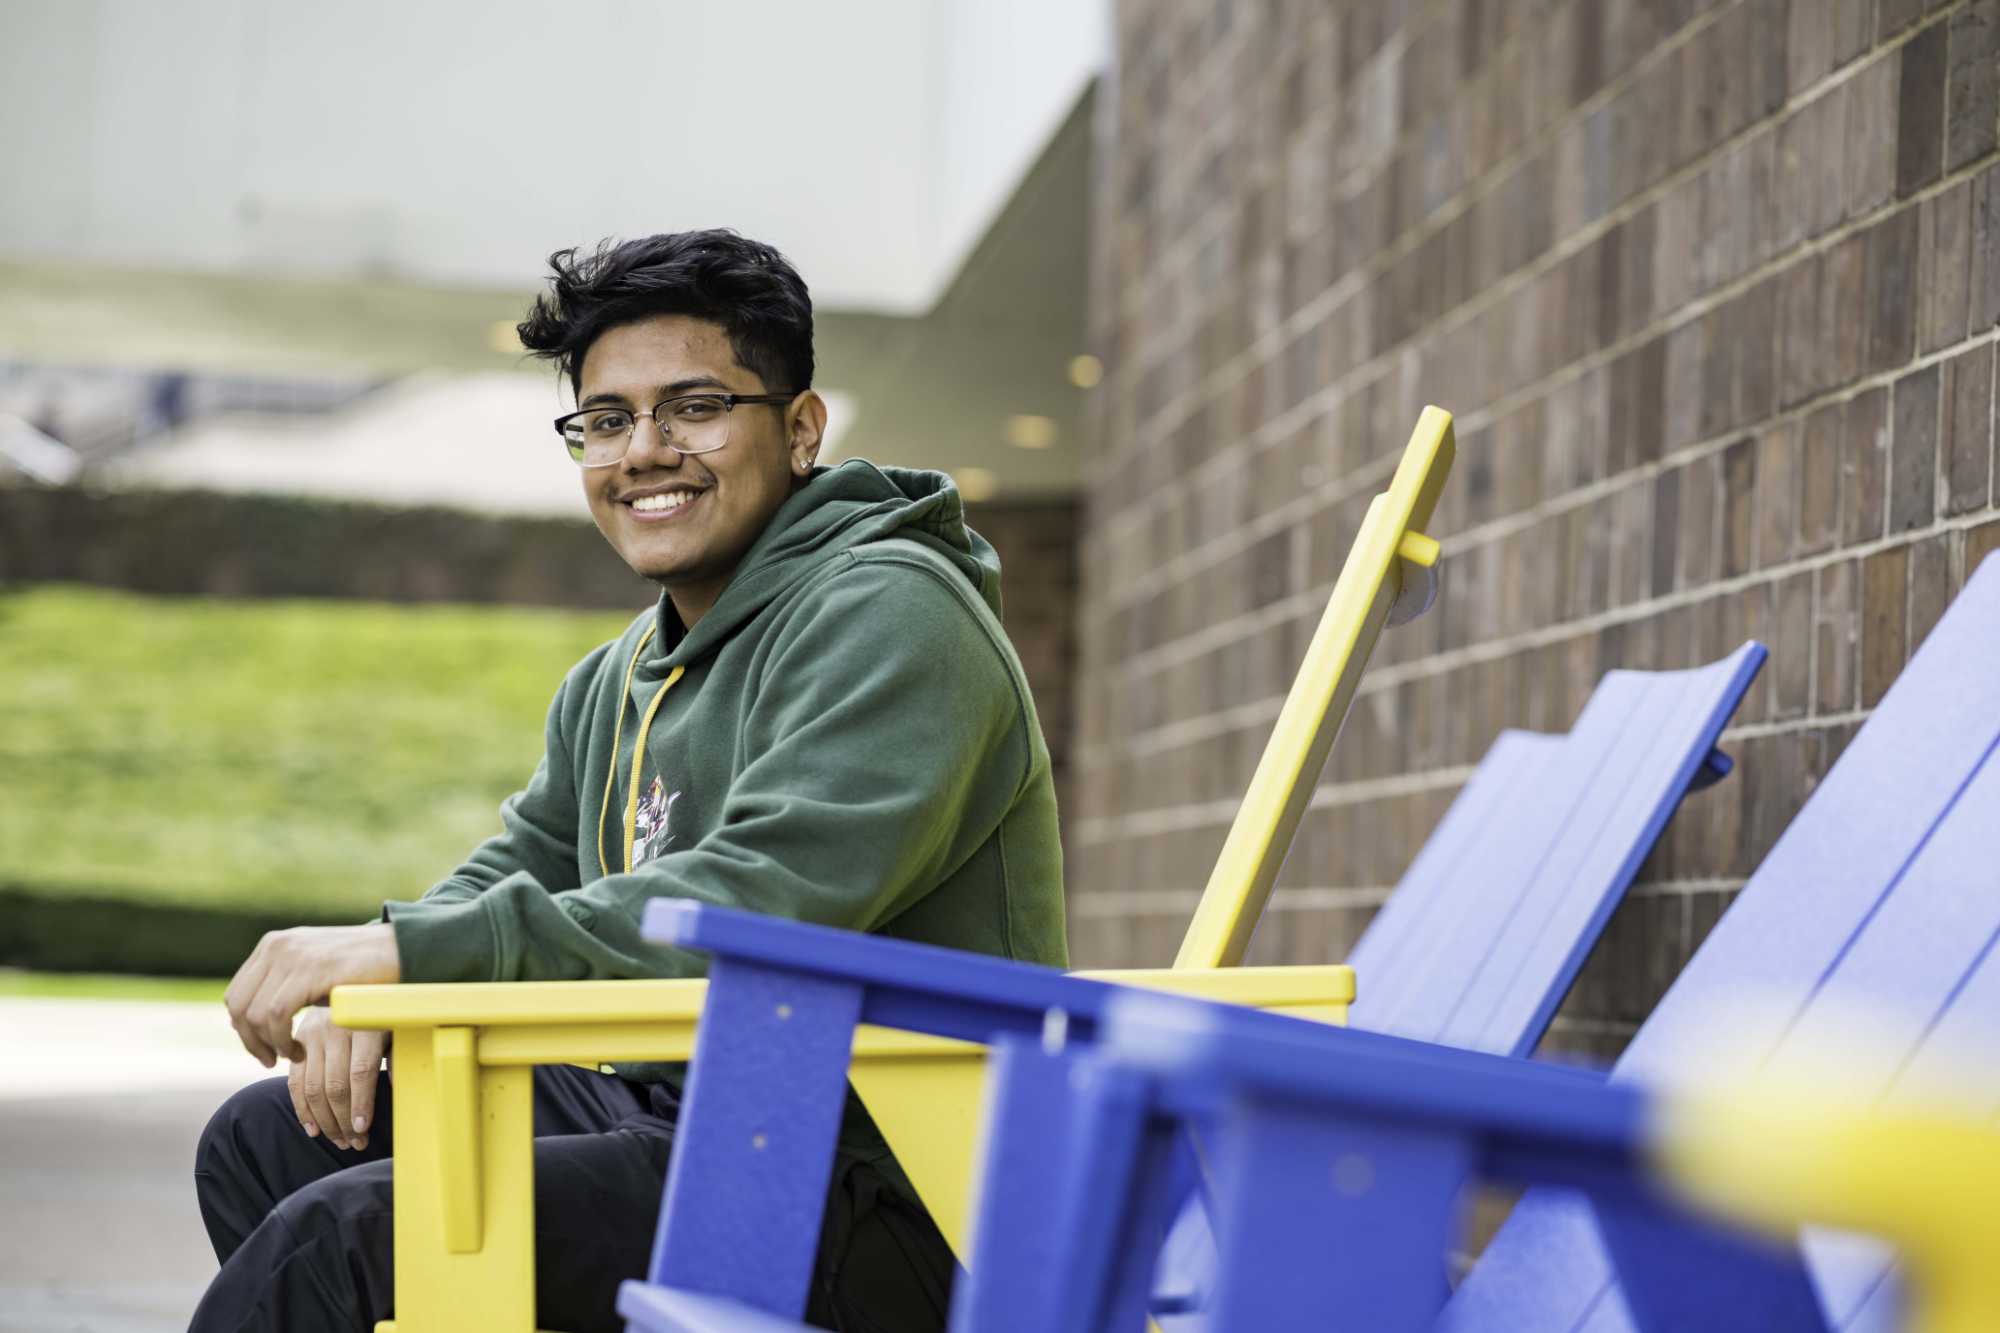 First-generation student Justin Pimentel seated outdoors in a yellow Adirondack chair and smiling at the camera.